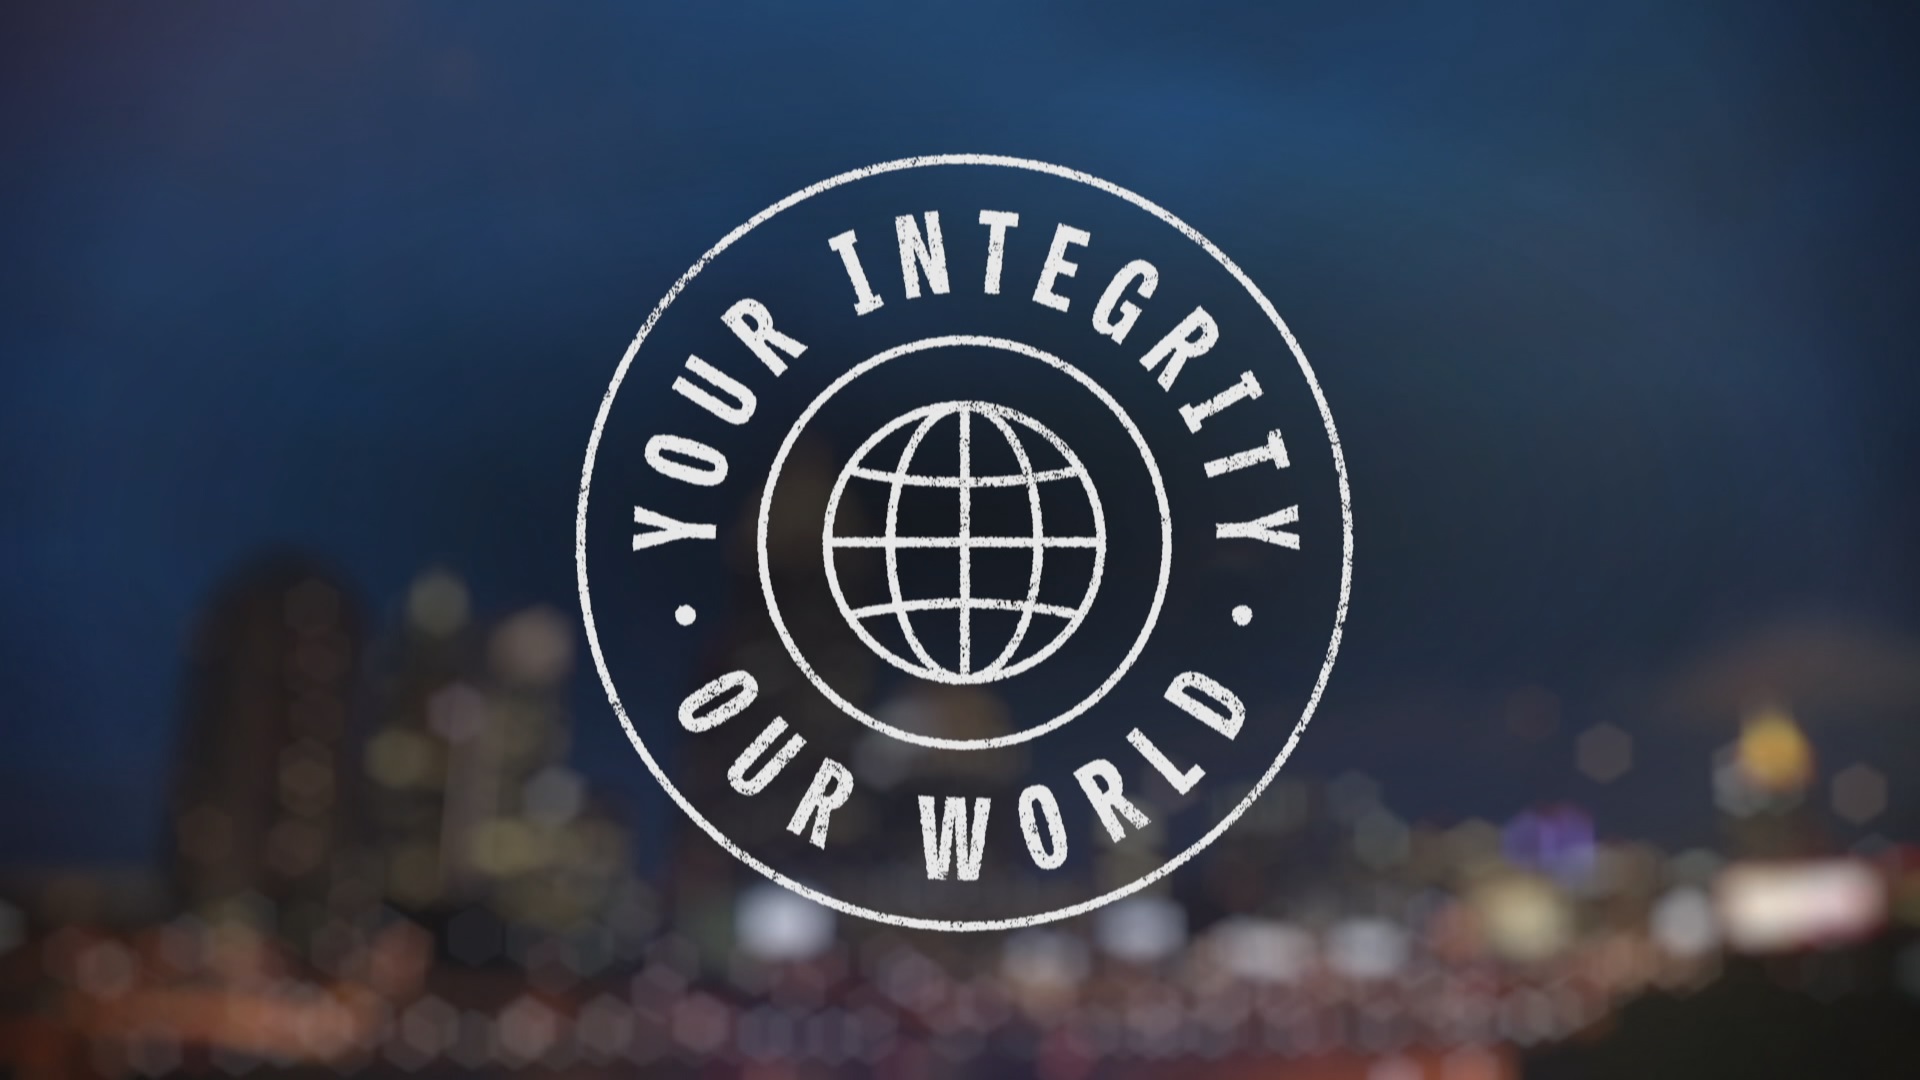 Your Integrity Our World Part 1